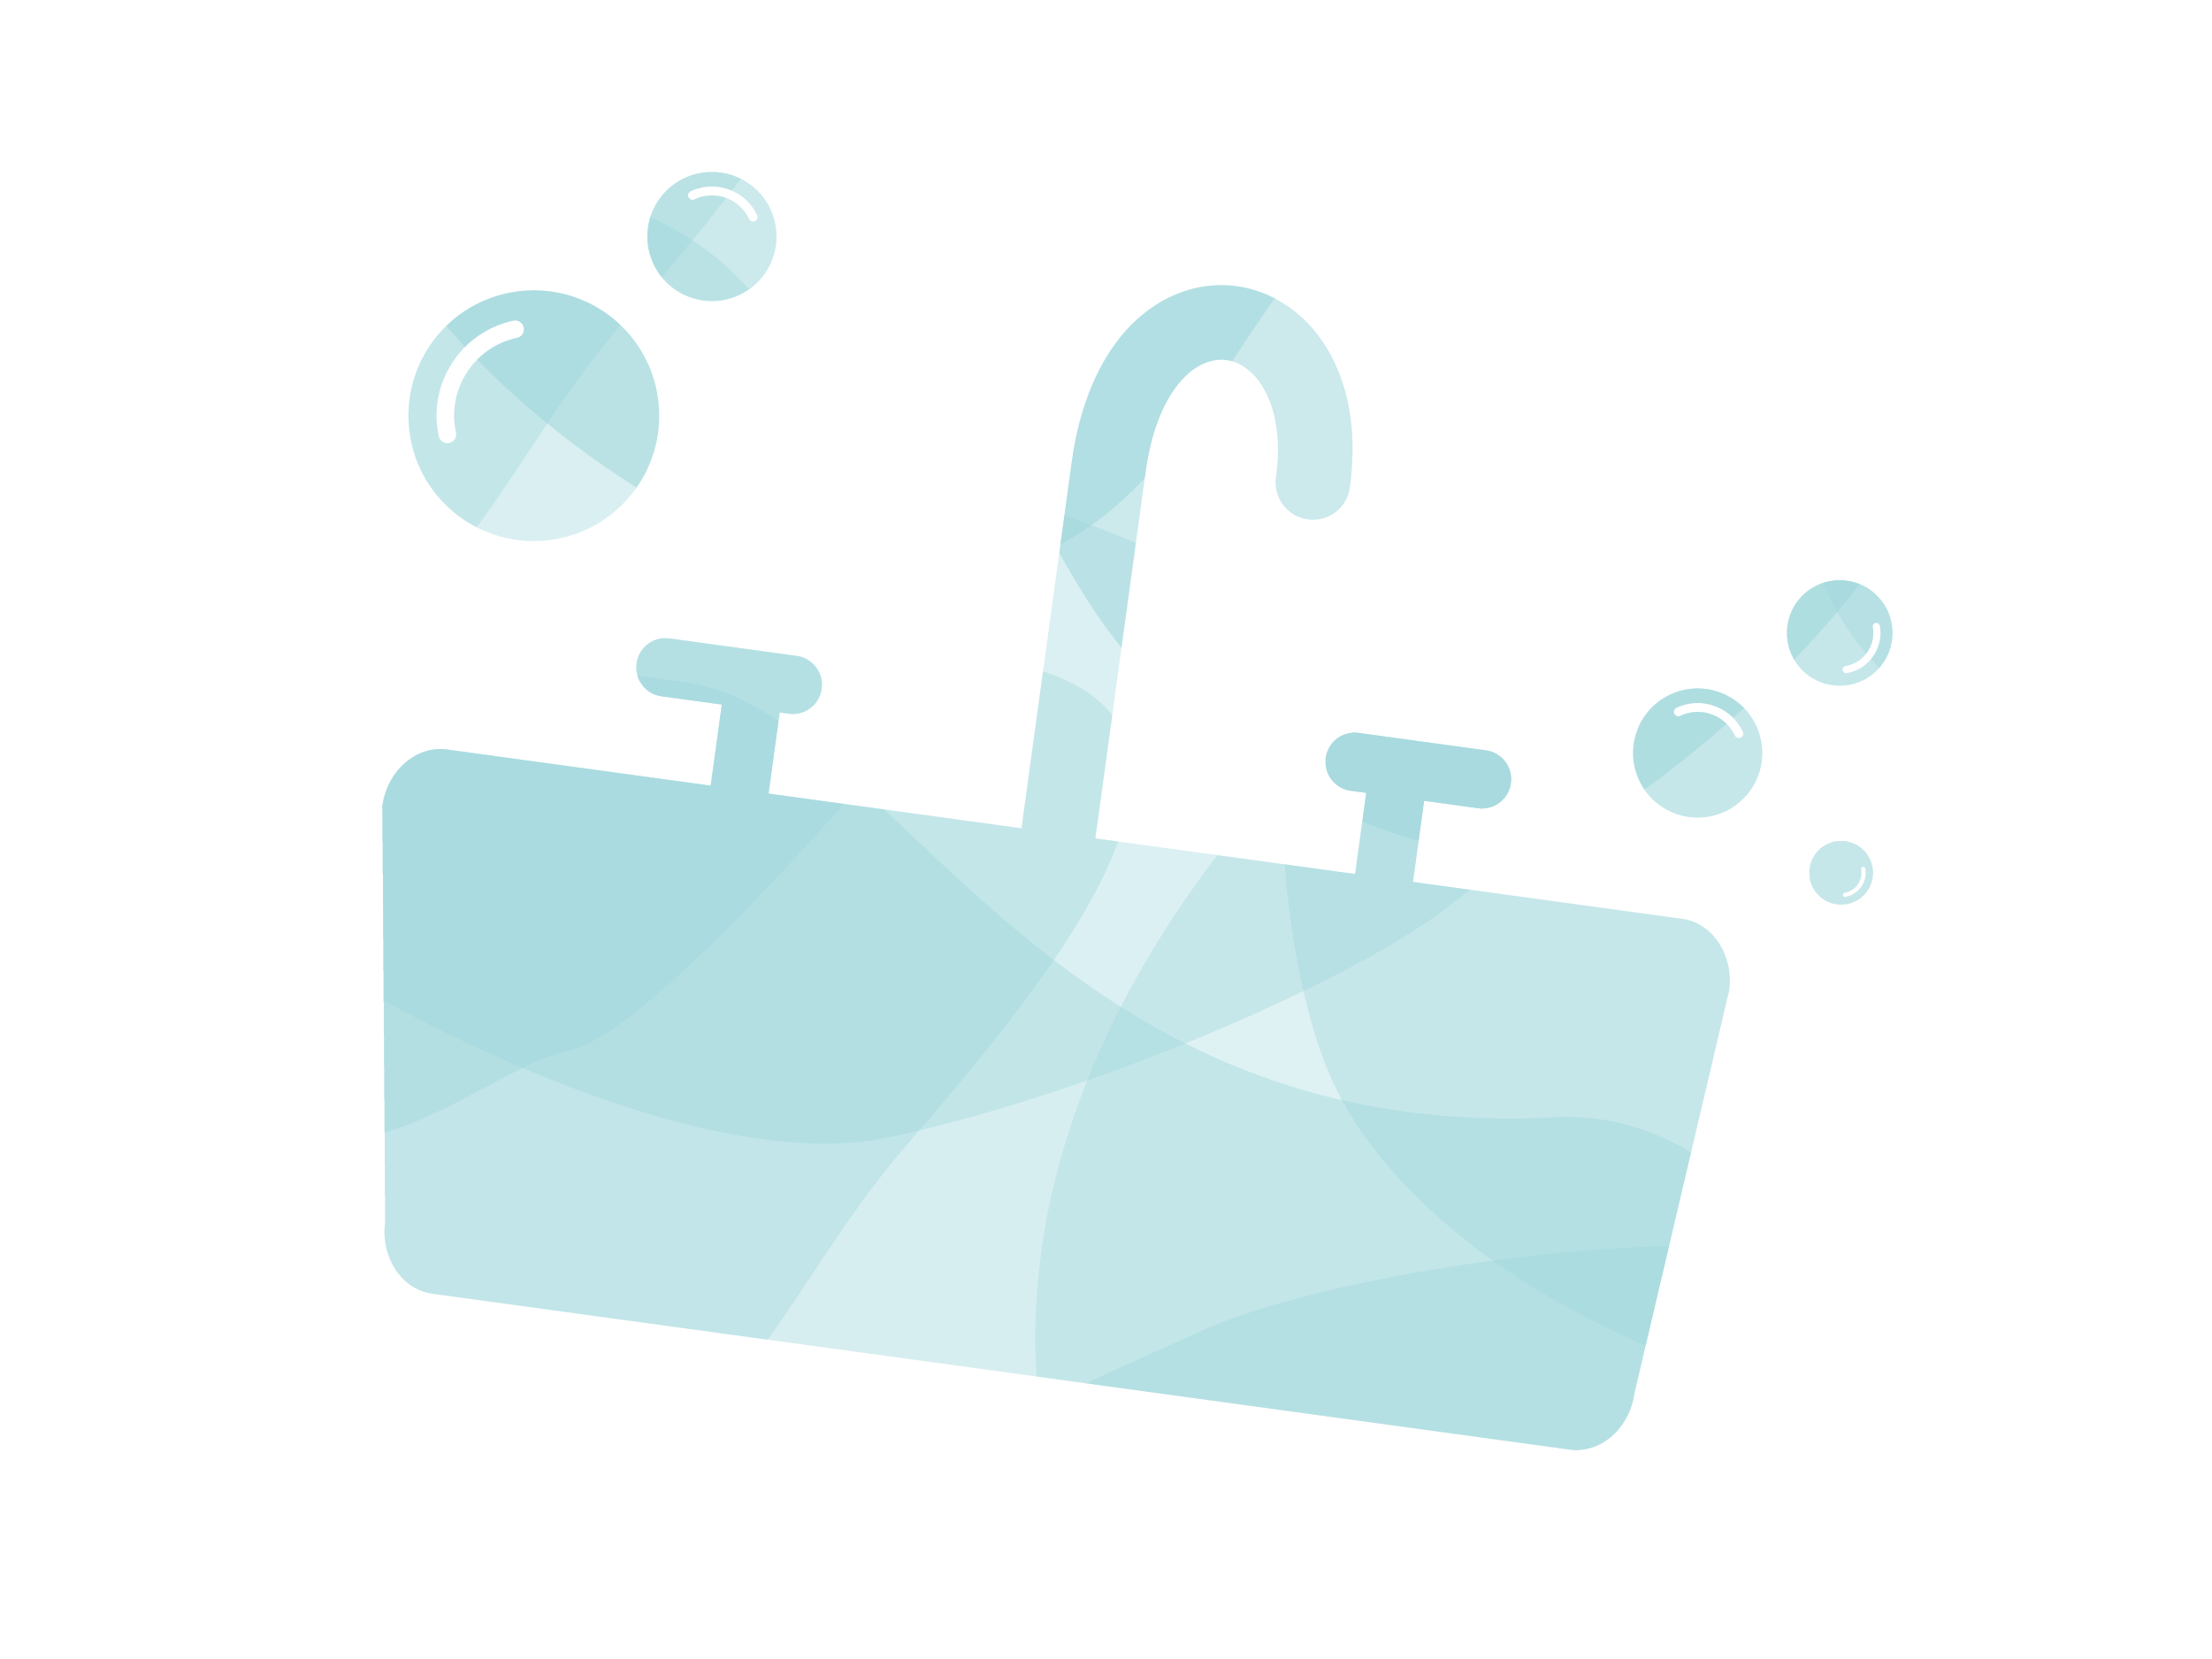 Sink and bubbles illustration